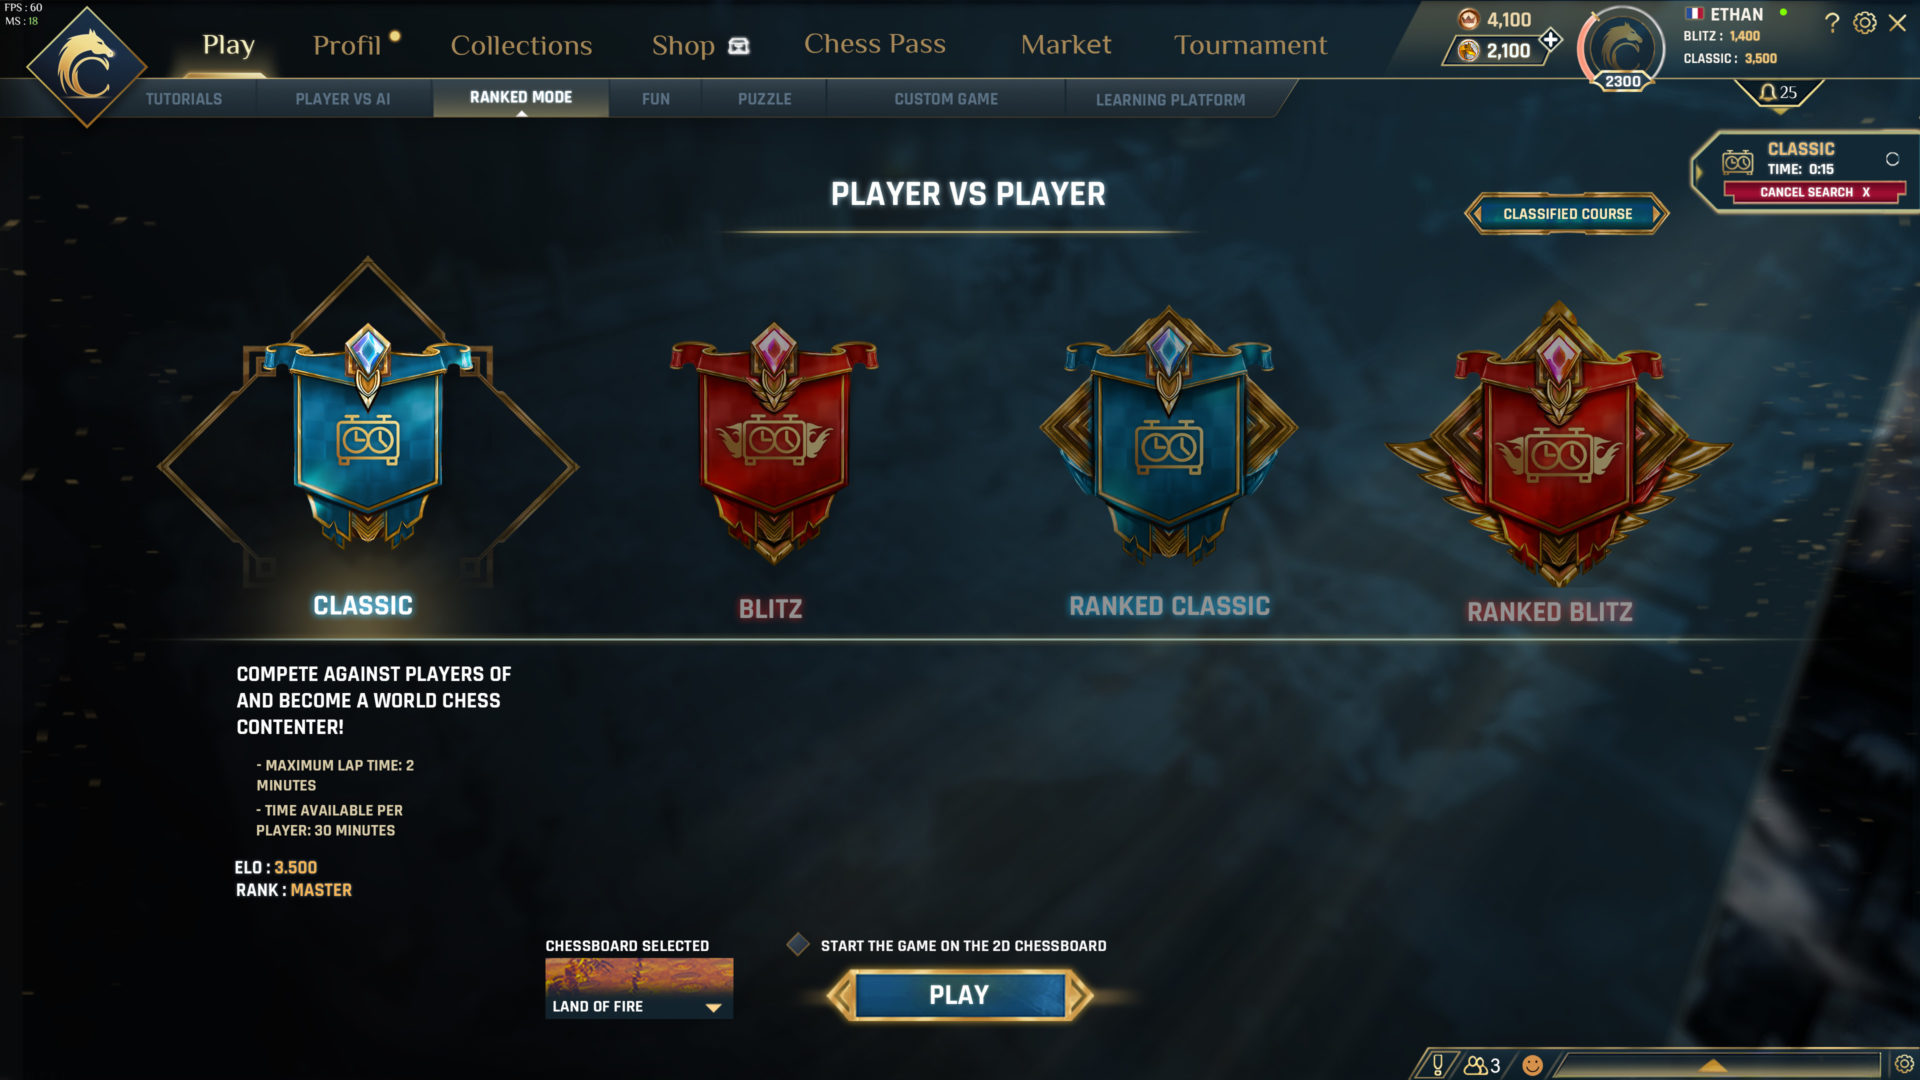 Game interface - Classic and Blitz modes in ranked 